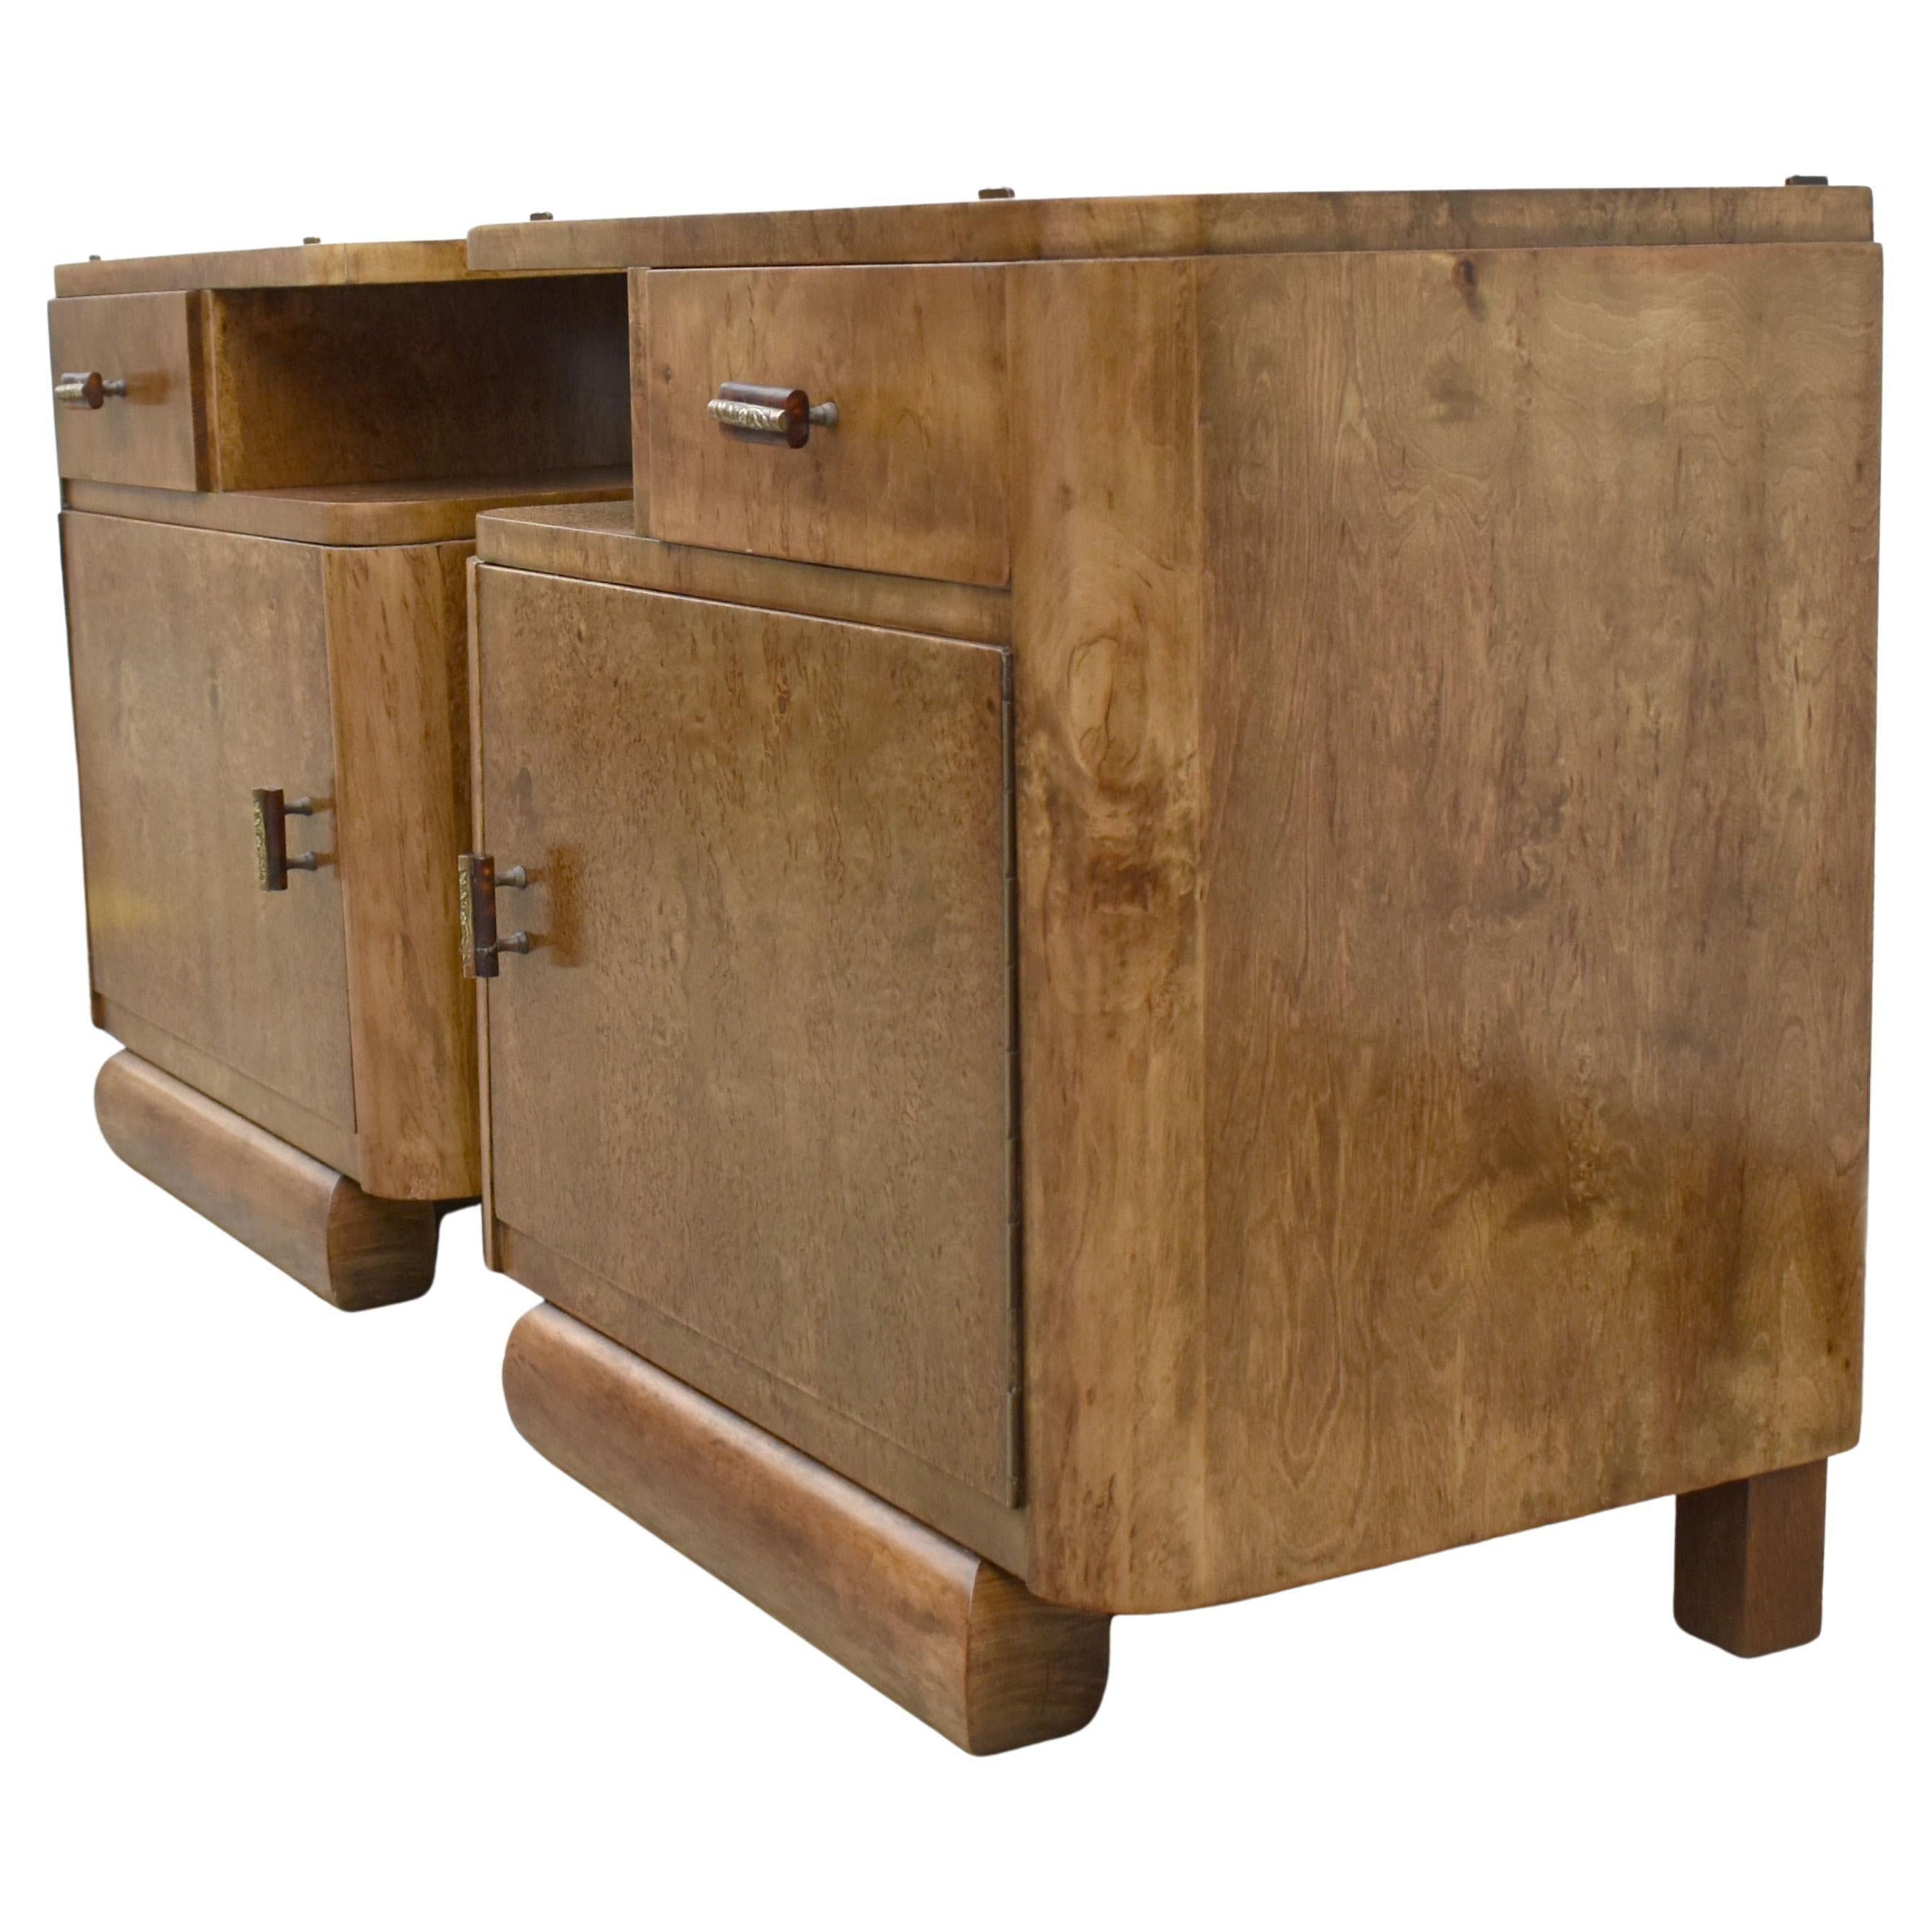 A rare opportunity to acquire high styled and totally original Art Deco bedside tables. Originating from France and dating to the early 1930's they fill both the highly desired shape of Art Deco at its best and sort after the luscious veneers of